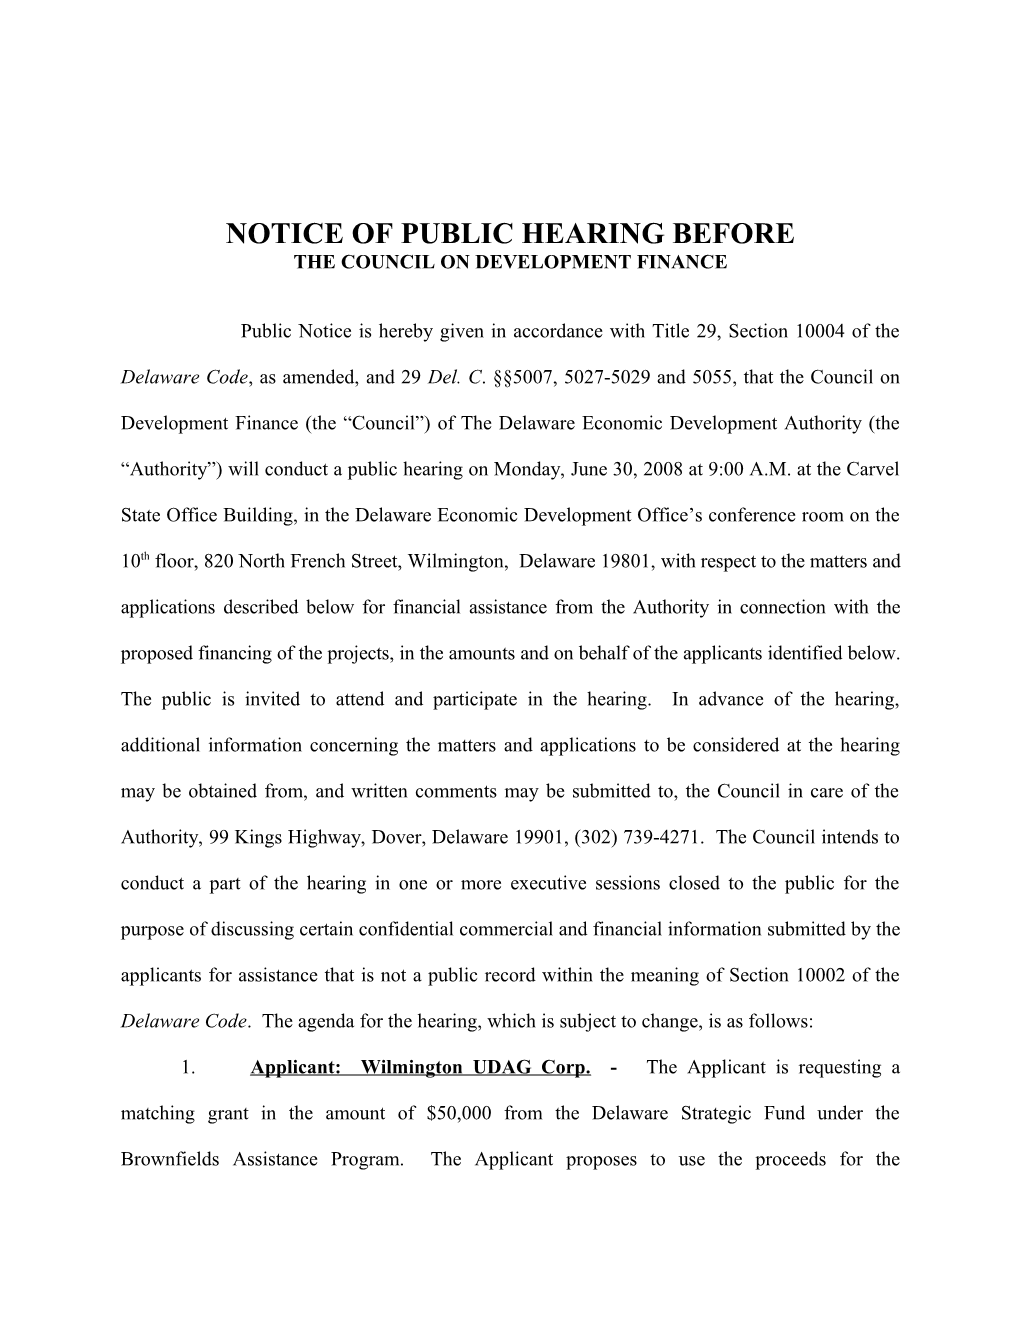 Notice of Public Hearing Before